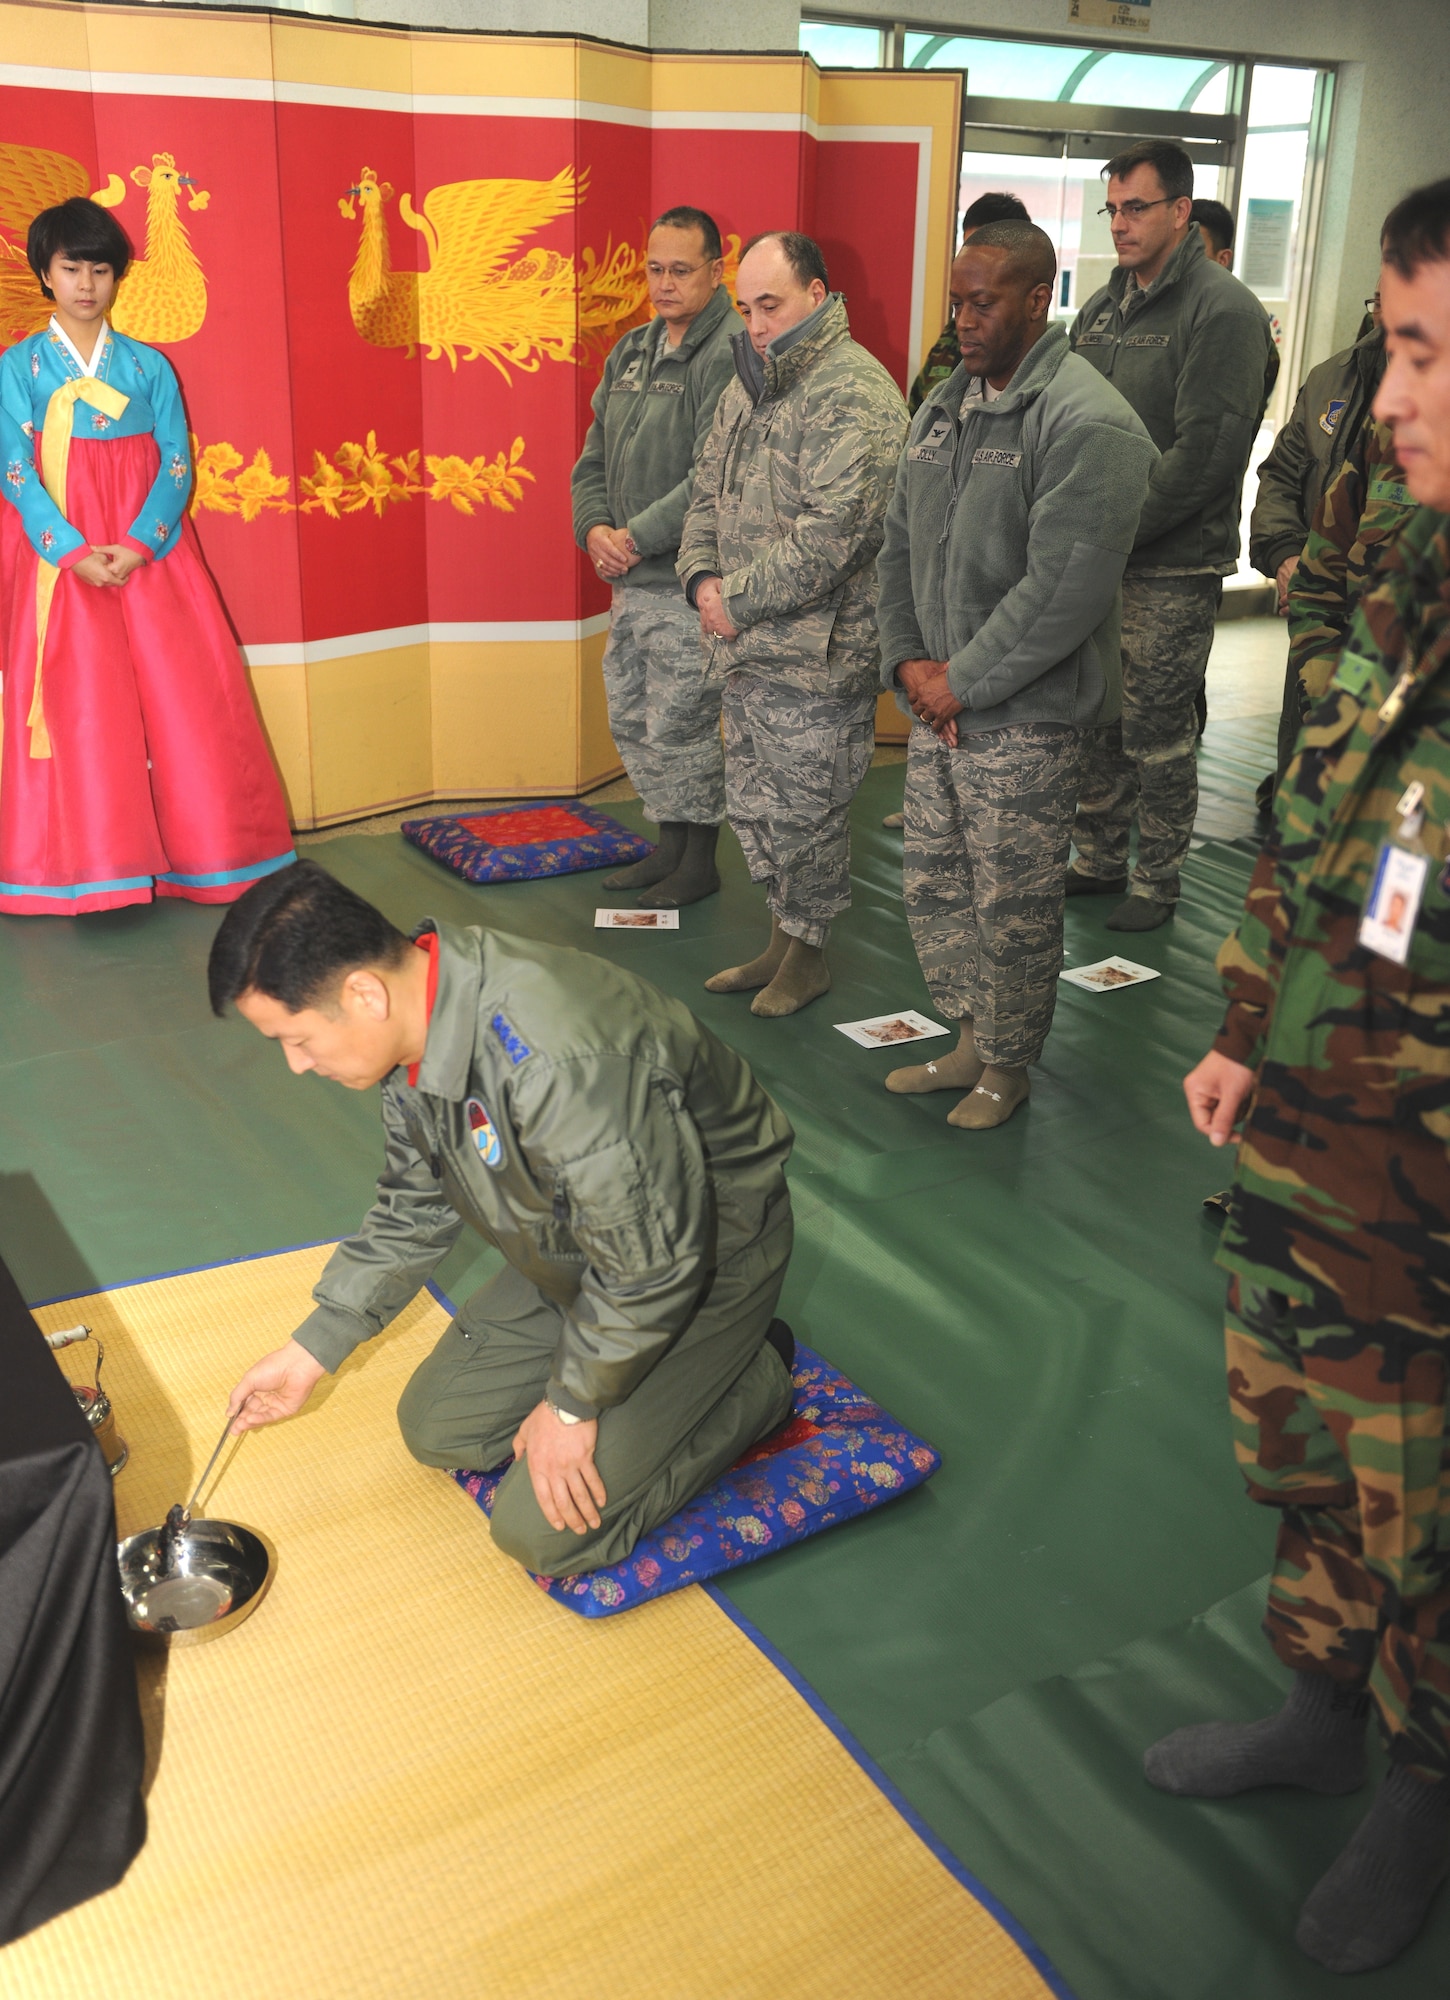 KUNSAN AIR BASE, Republic of Korea -- Col. Jung Sang-Hwa, Republic of Korea Air Force 38th Fighter Group commander, burns a letter to ancestors during a memorial service held during a Lunar New Year ceremony in the ROKAF base exchange Feb. 3. The combined 8th Fighter Wing and ROKAF 38th FG ceremony included the memorial service, ceremonial bowing, a traditional Korean breakfast and traditional games. (U.S. Air Force photo/Senior Airman Ciara Wymbs)